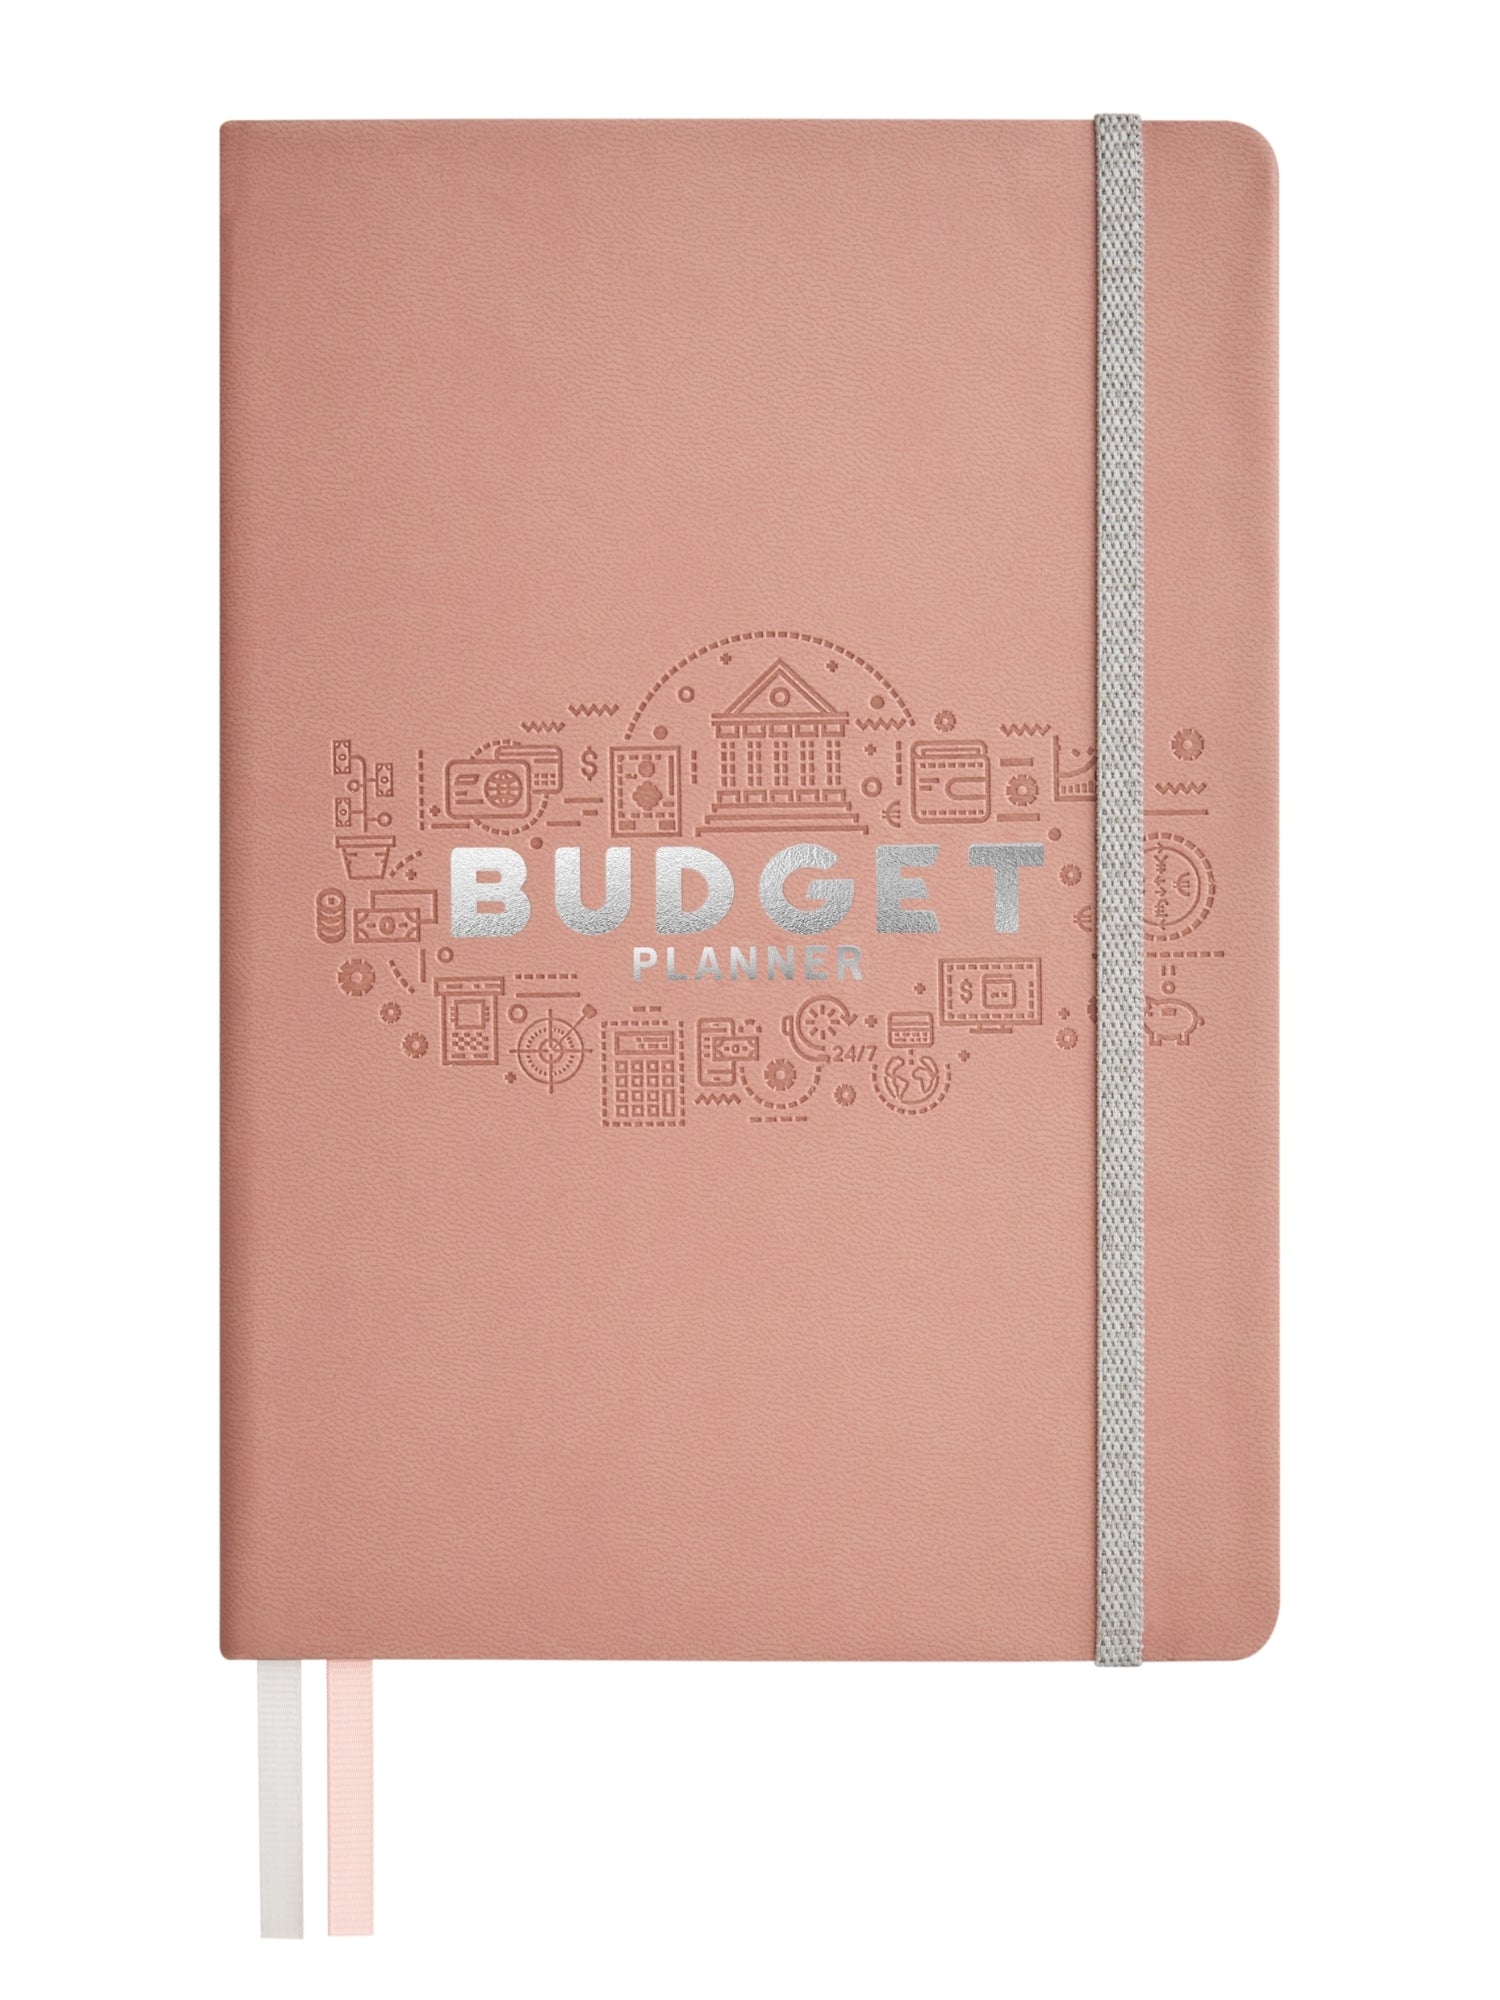 Doodle A5 Undated Hard Bound Vegan Leather Financial budget Planner - Budget Boss